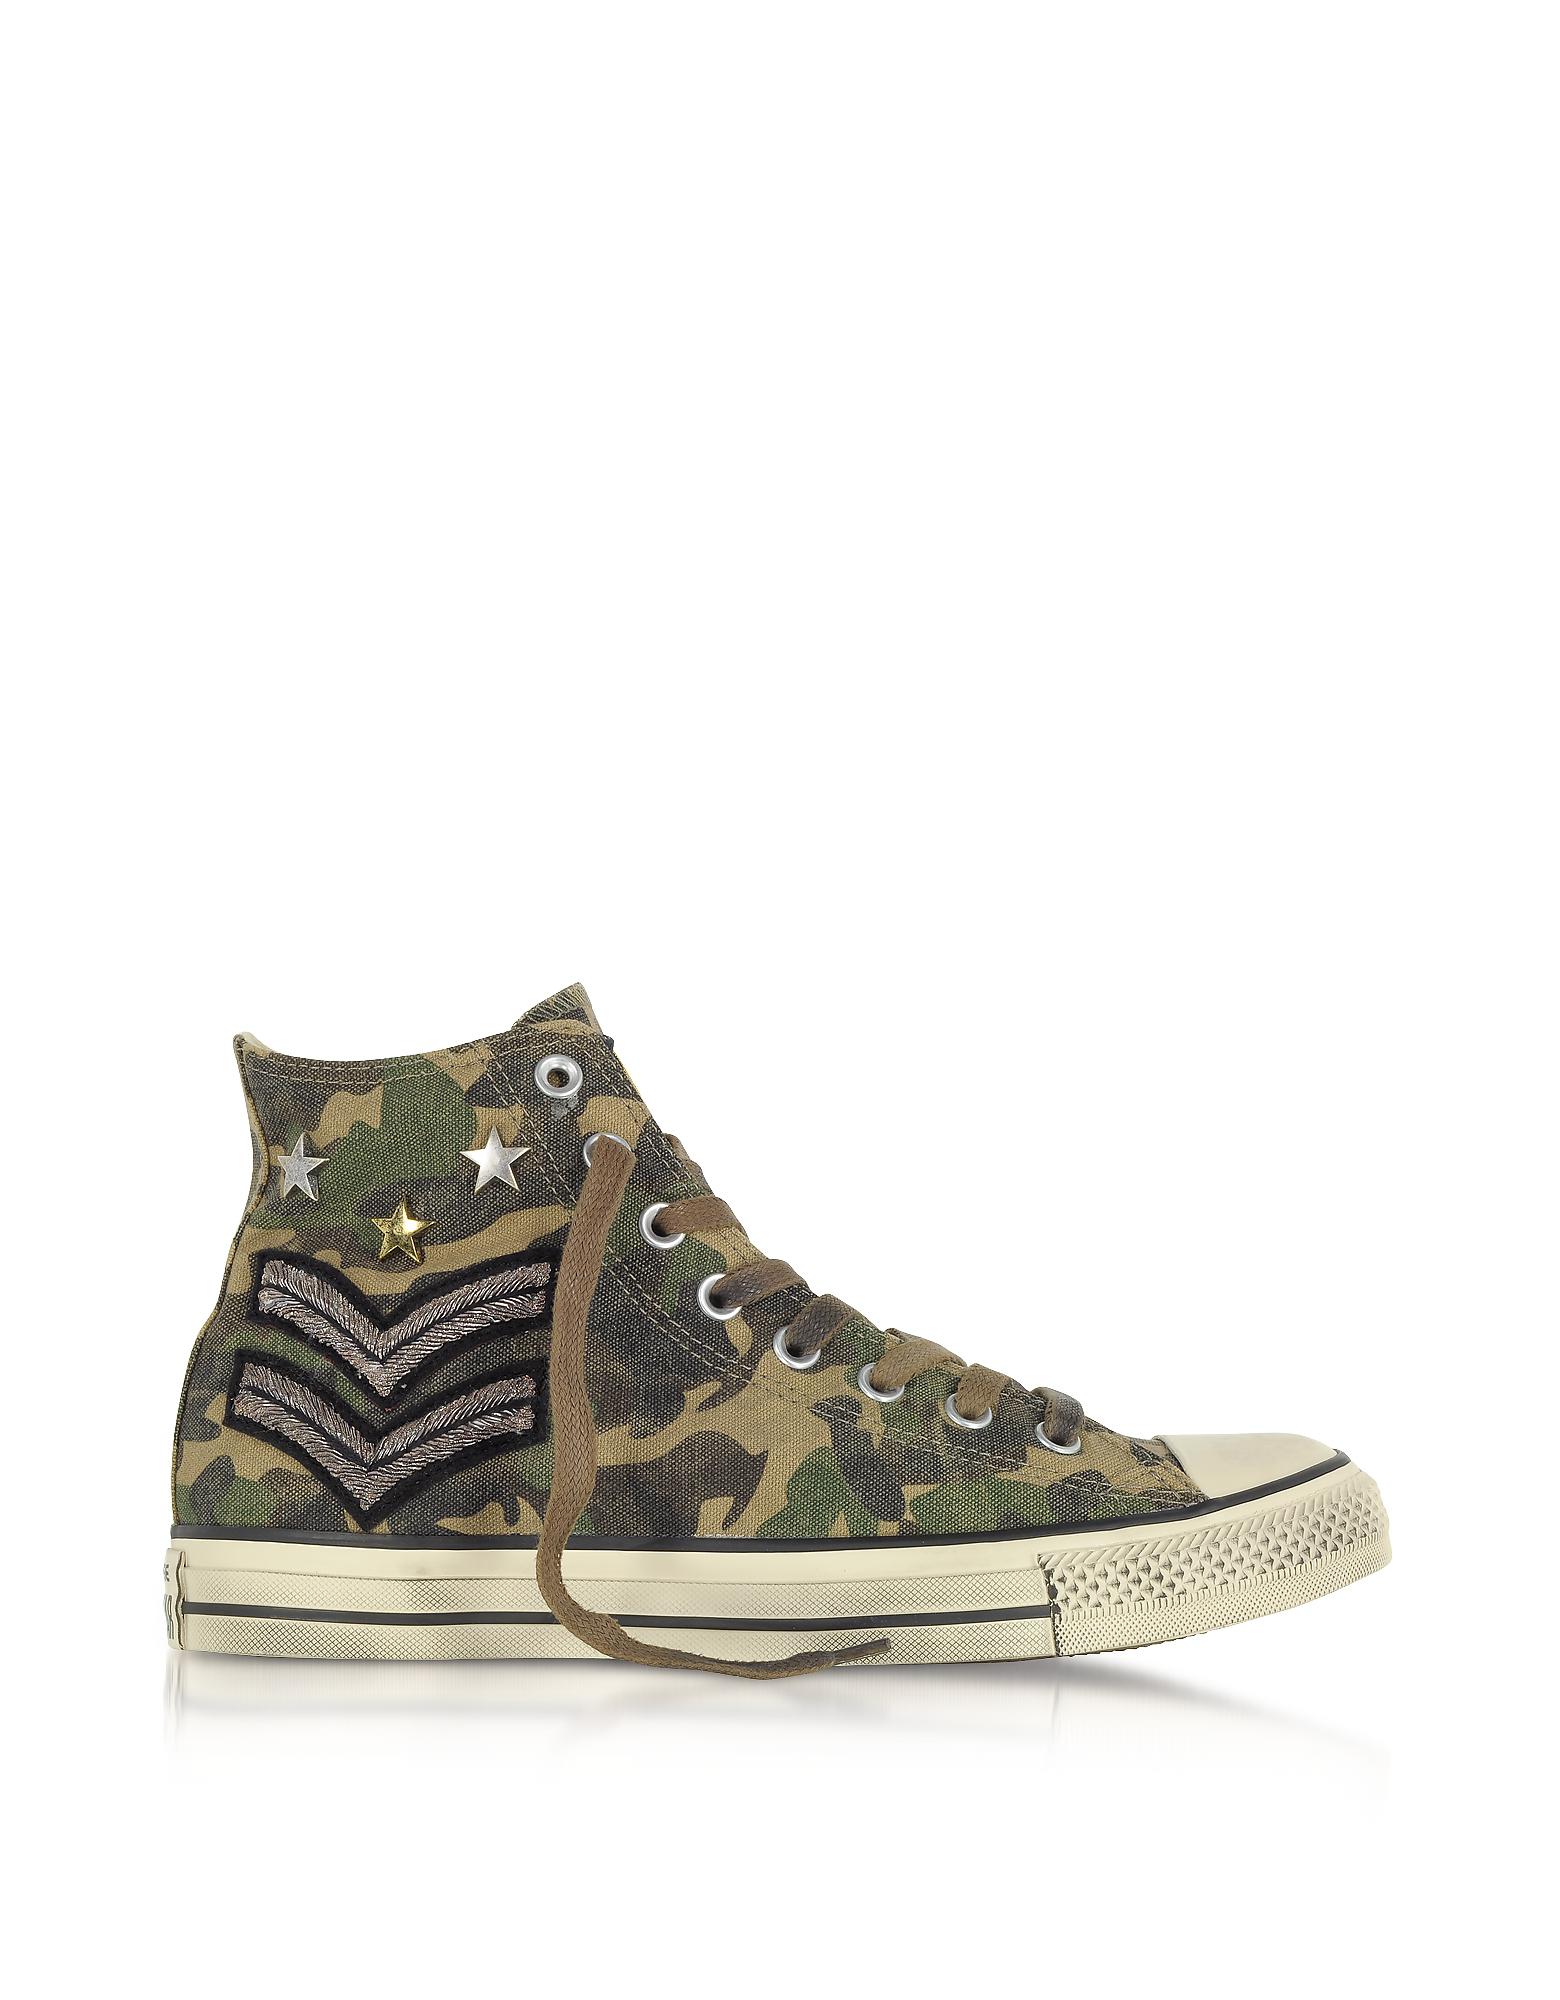 military chuck patchwork taylor sneakers converse unisex canvas ltd shoes lyst